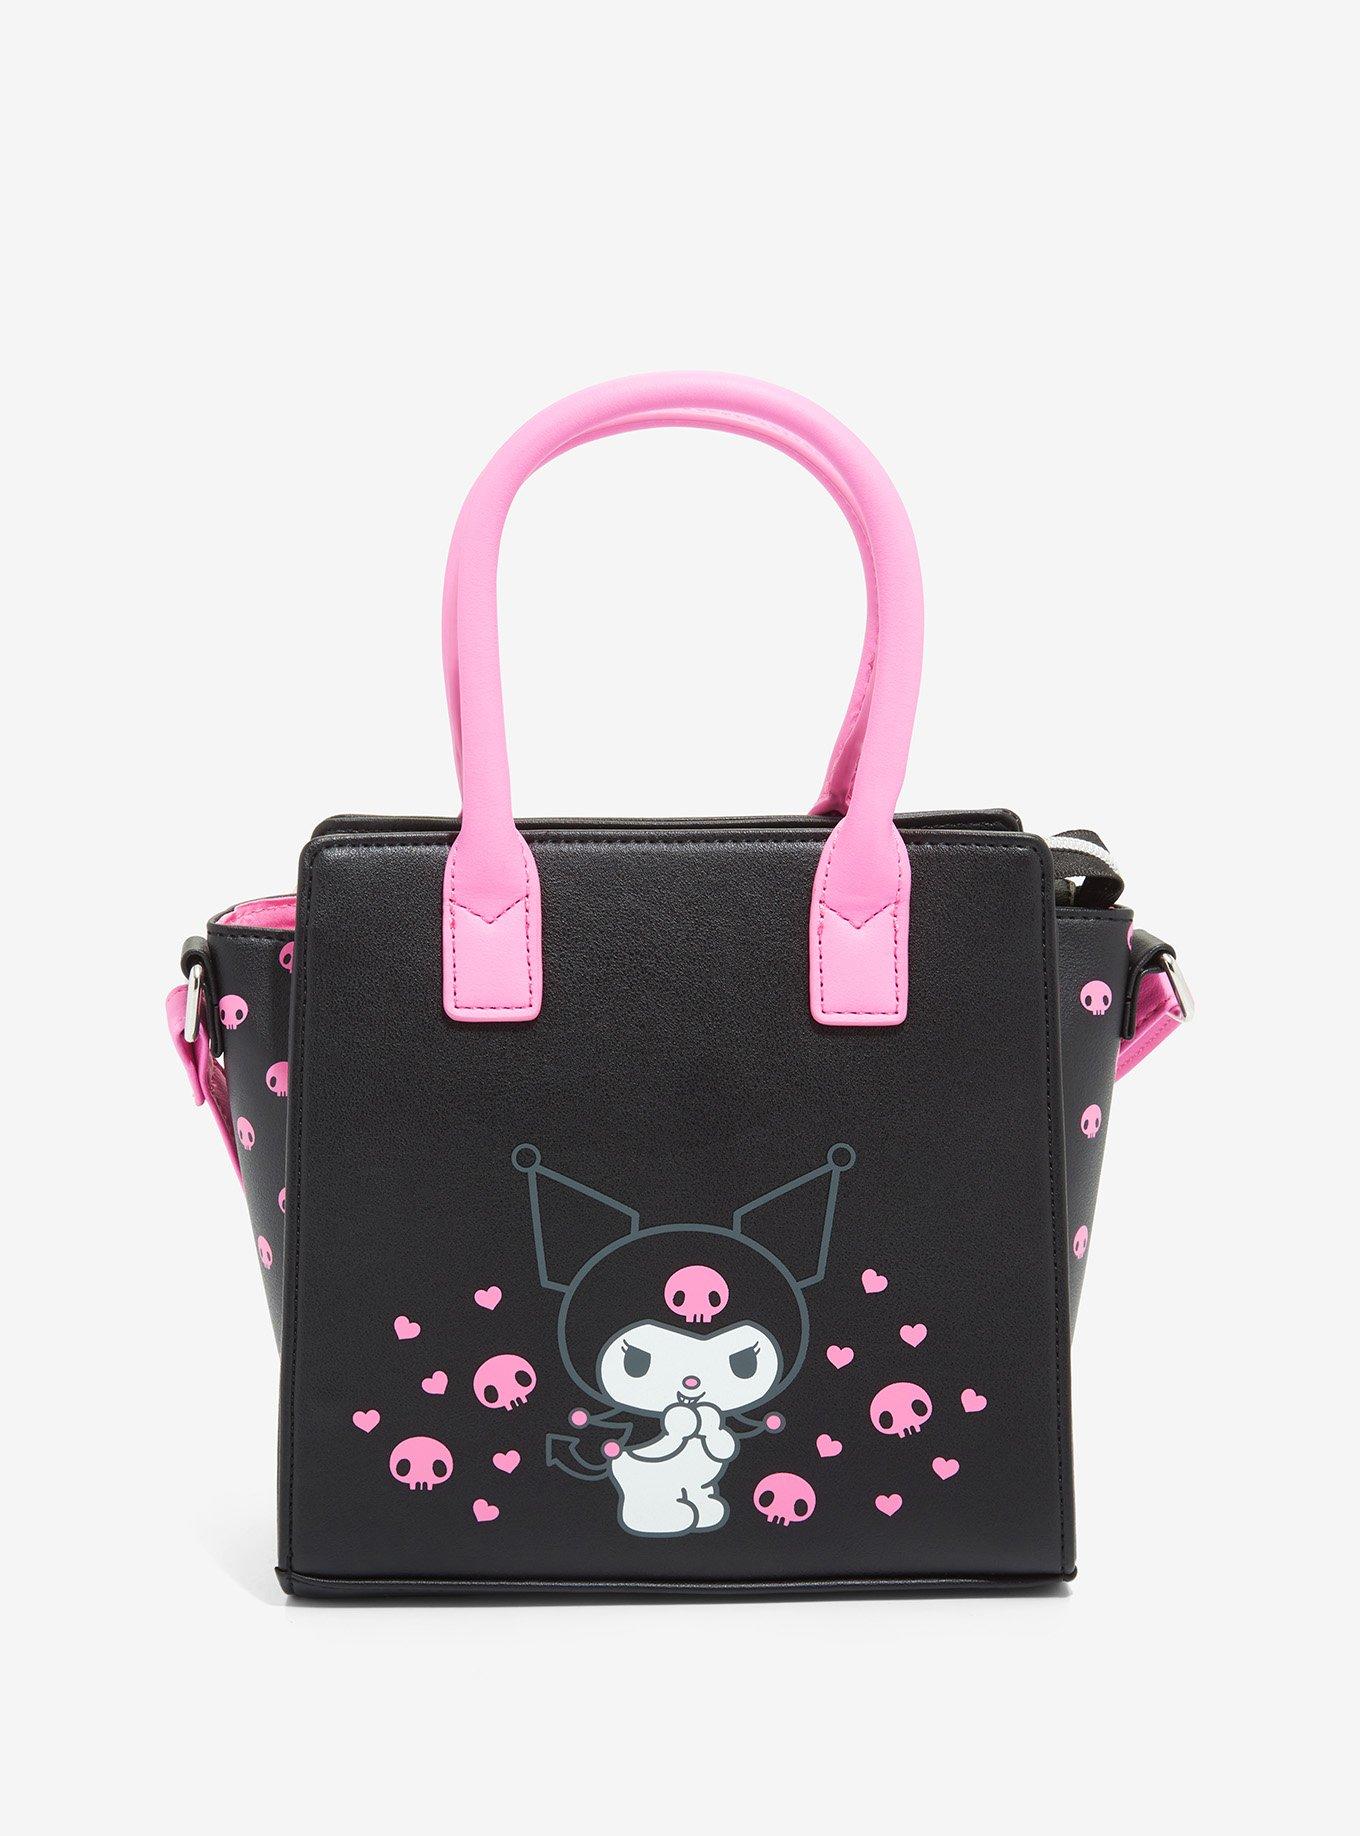 Kuromi and My Melody Duffle Bag by Magestical Mixie